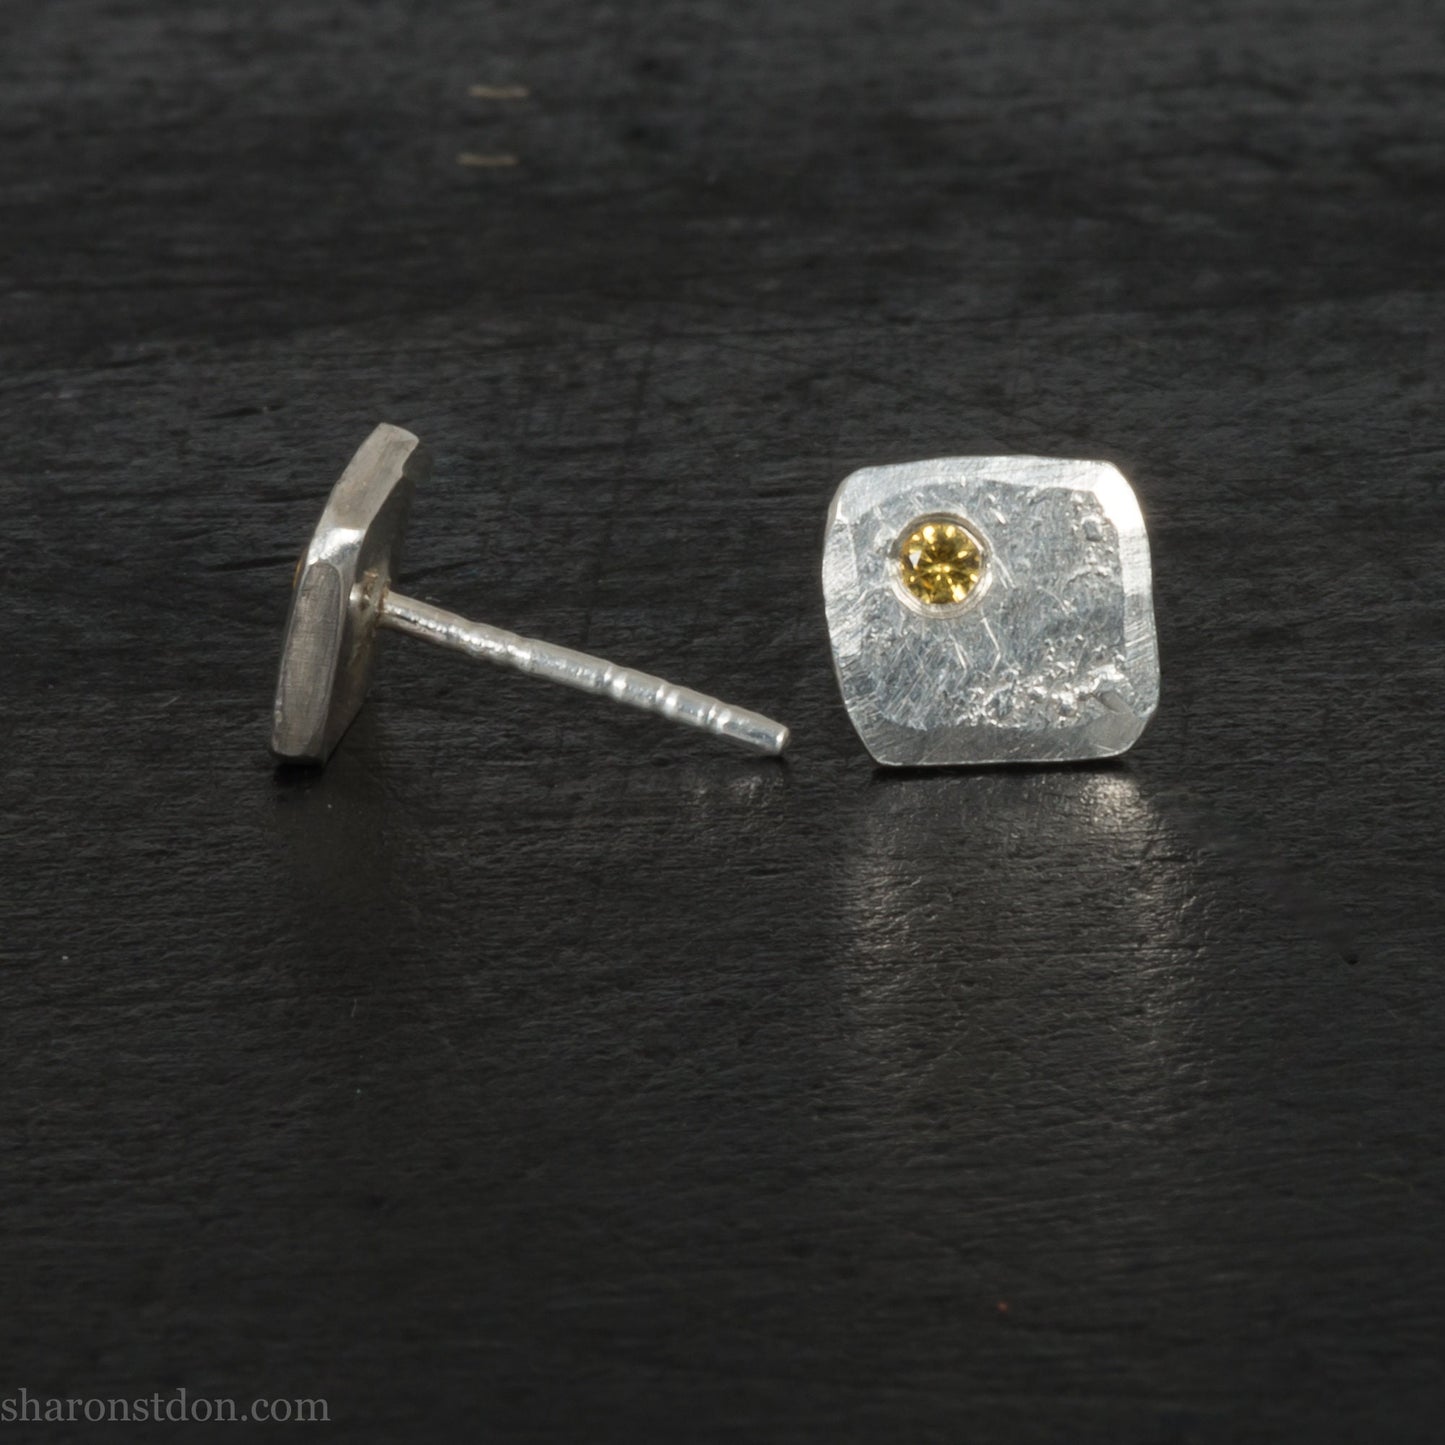 Canary yellow diamond stud earrings | Small square 925 sterling silver and gemstone stud earrings | Handmade, unique gift for him or her..